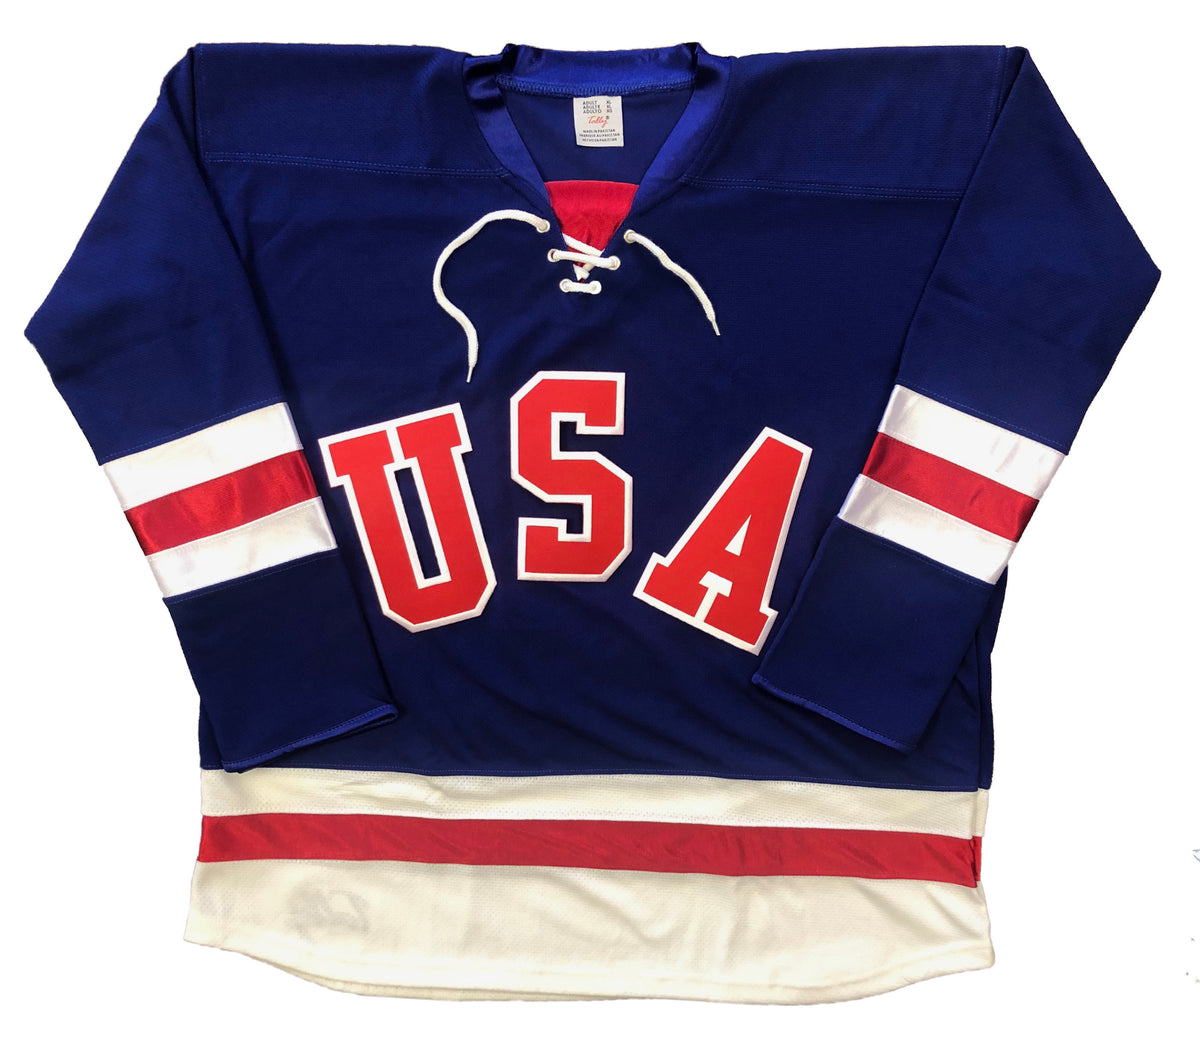 USA 1980 Miracle on Ice Home White Adult Jersey